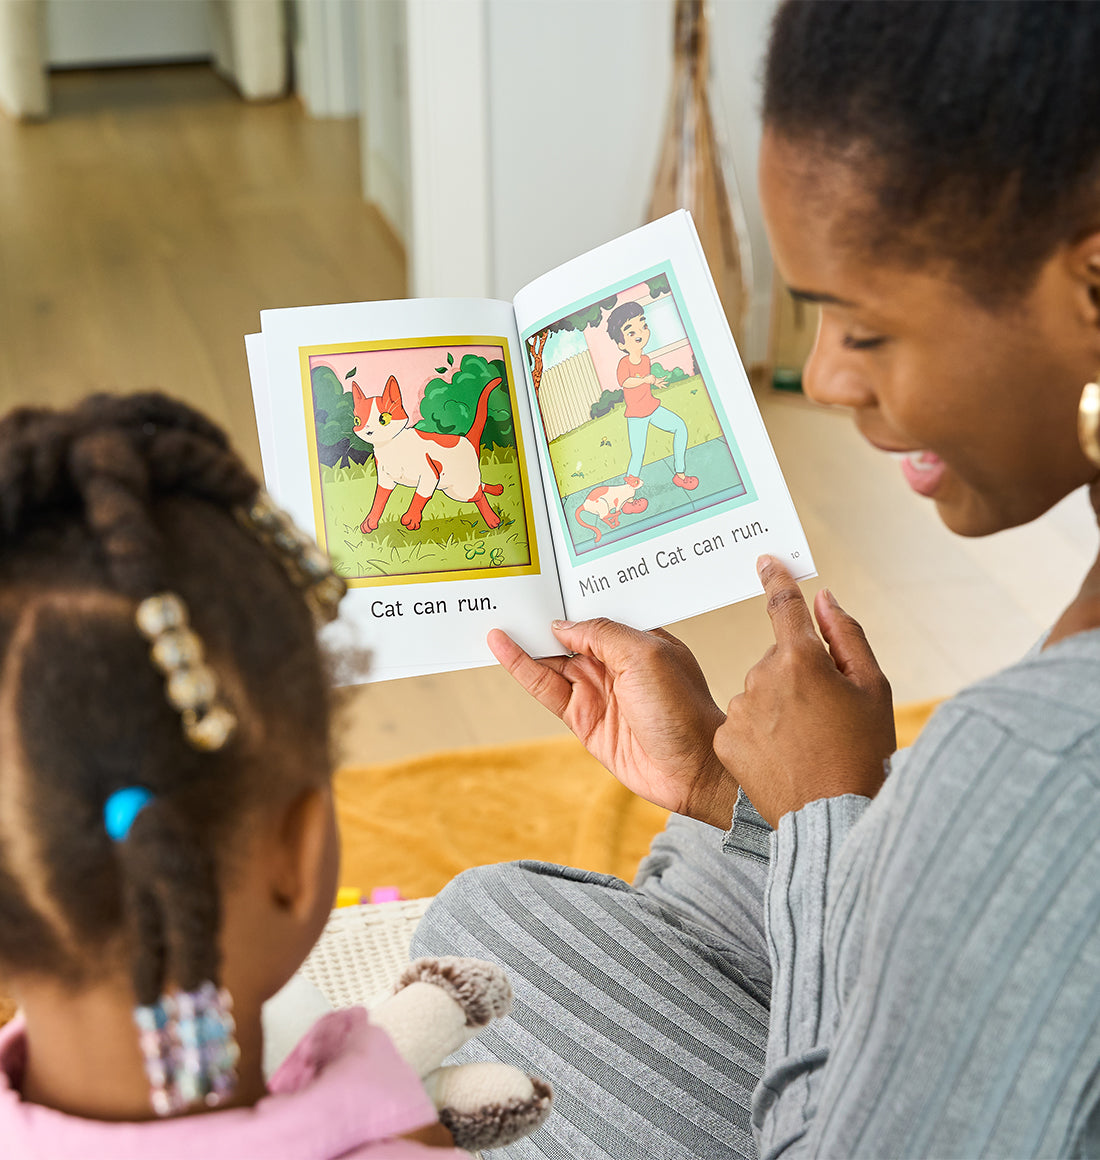 An adult reads a children's book with a young child. The open pages show illustrated scenes with the captions Cat can run and Min and Cat can run.